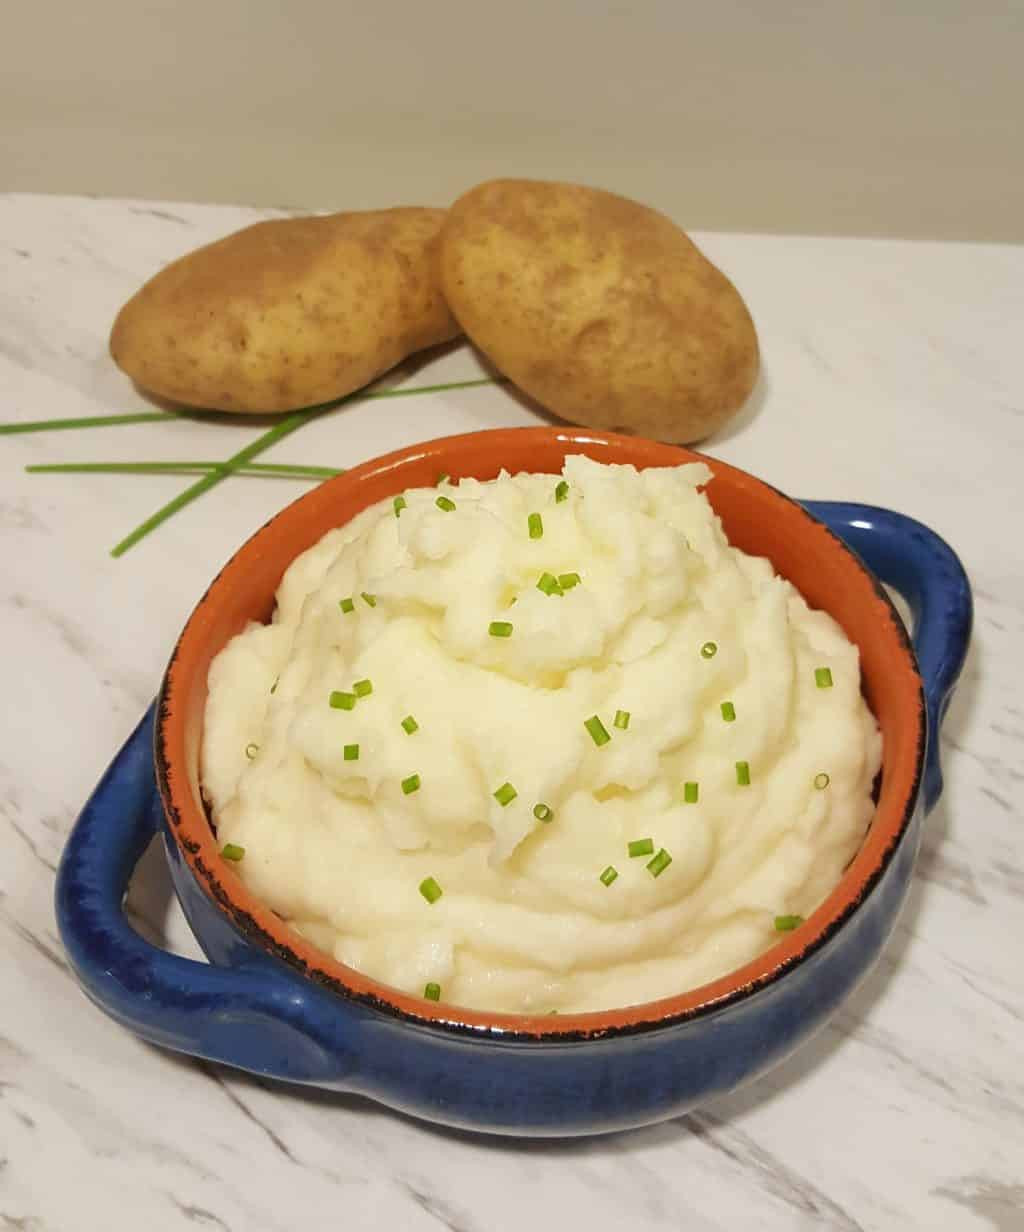 Pressure Cook Mashed Potatoes
 Pressure Cooker Instant Pot Mashed Potatoes Whipped